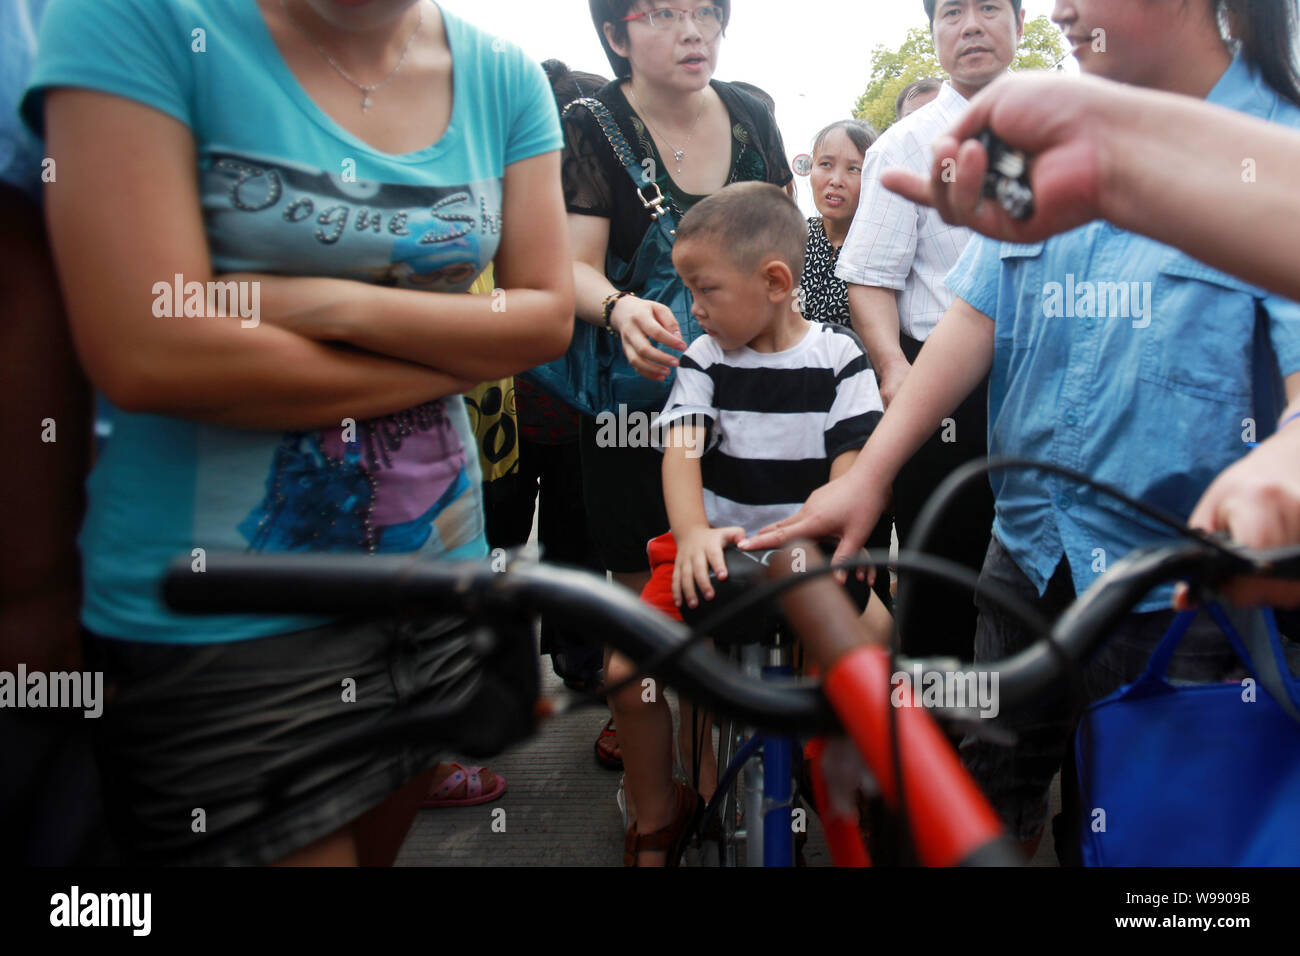 A kid who witnessed a staff injuring eight children at a daycare center is picked up by his parent at the center in Shanghai, China, 29 August 2011. Stock Photo